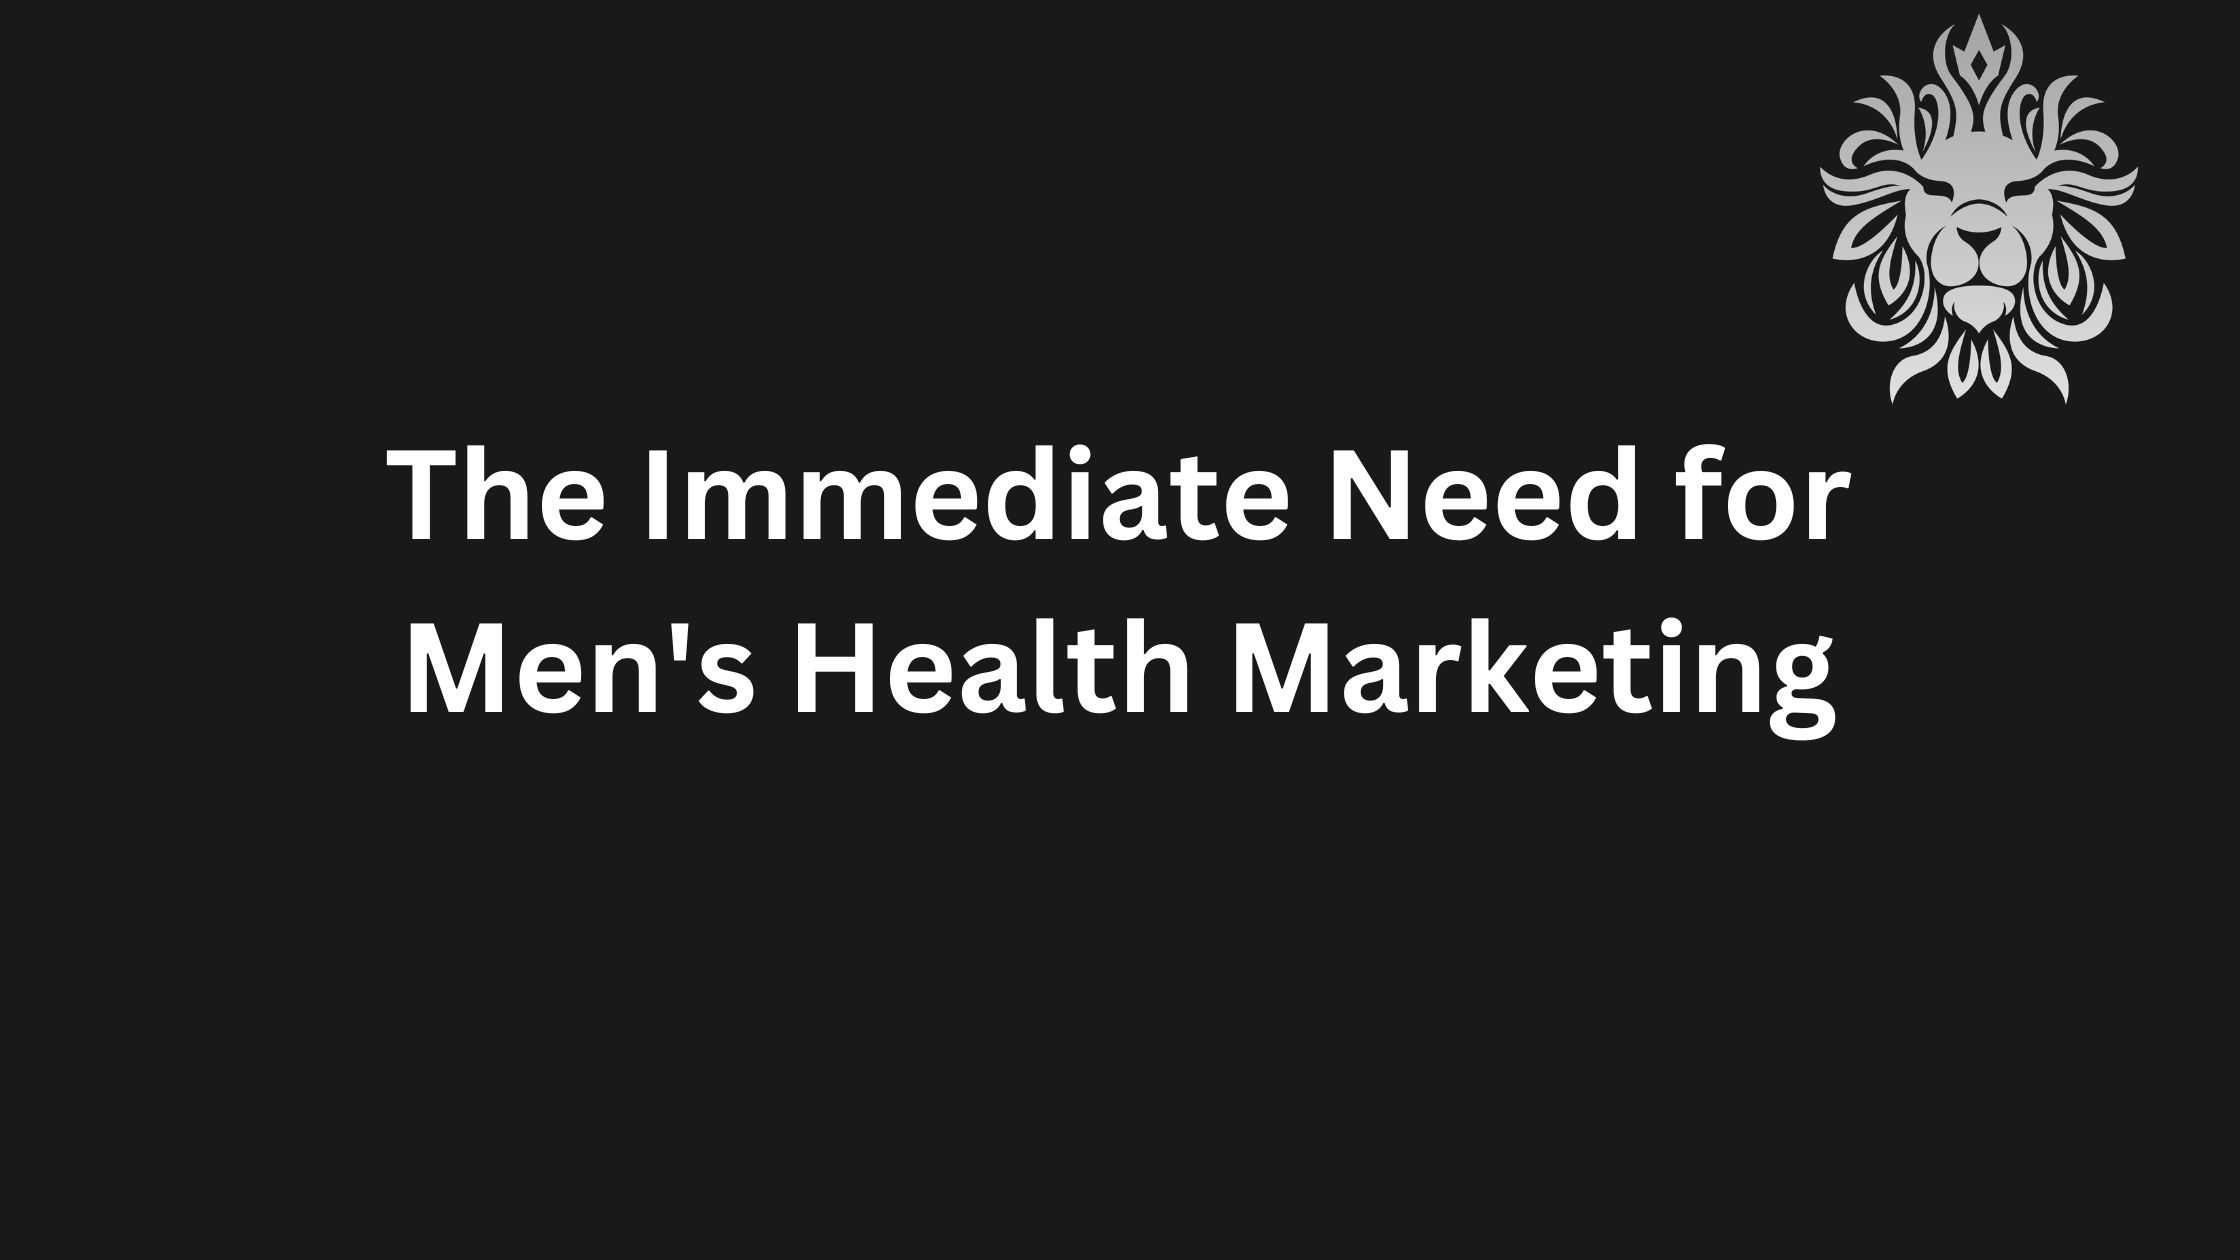 The Immediate Need for Men’s Health Marketing